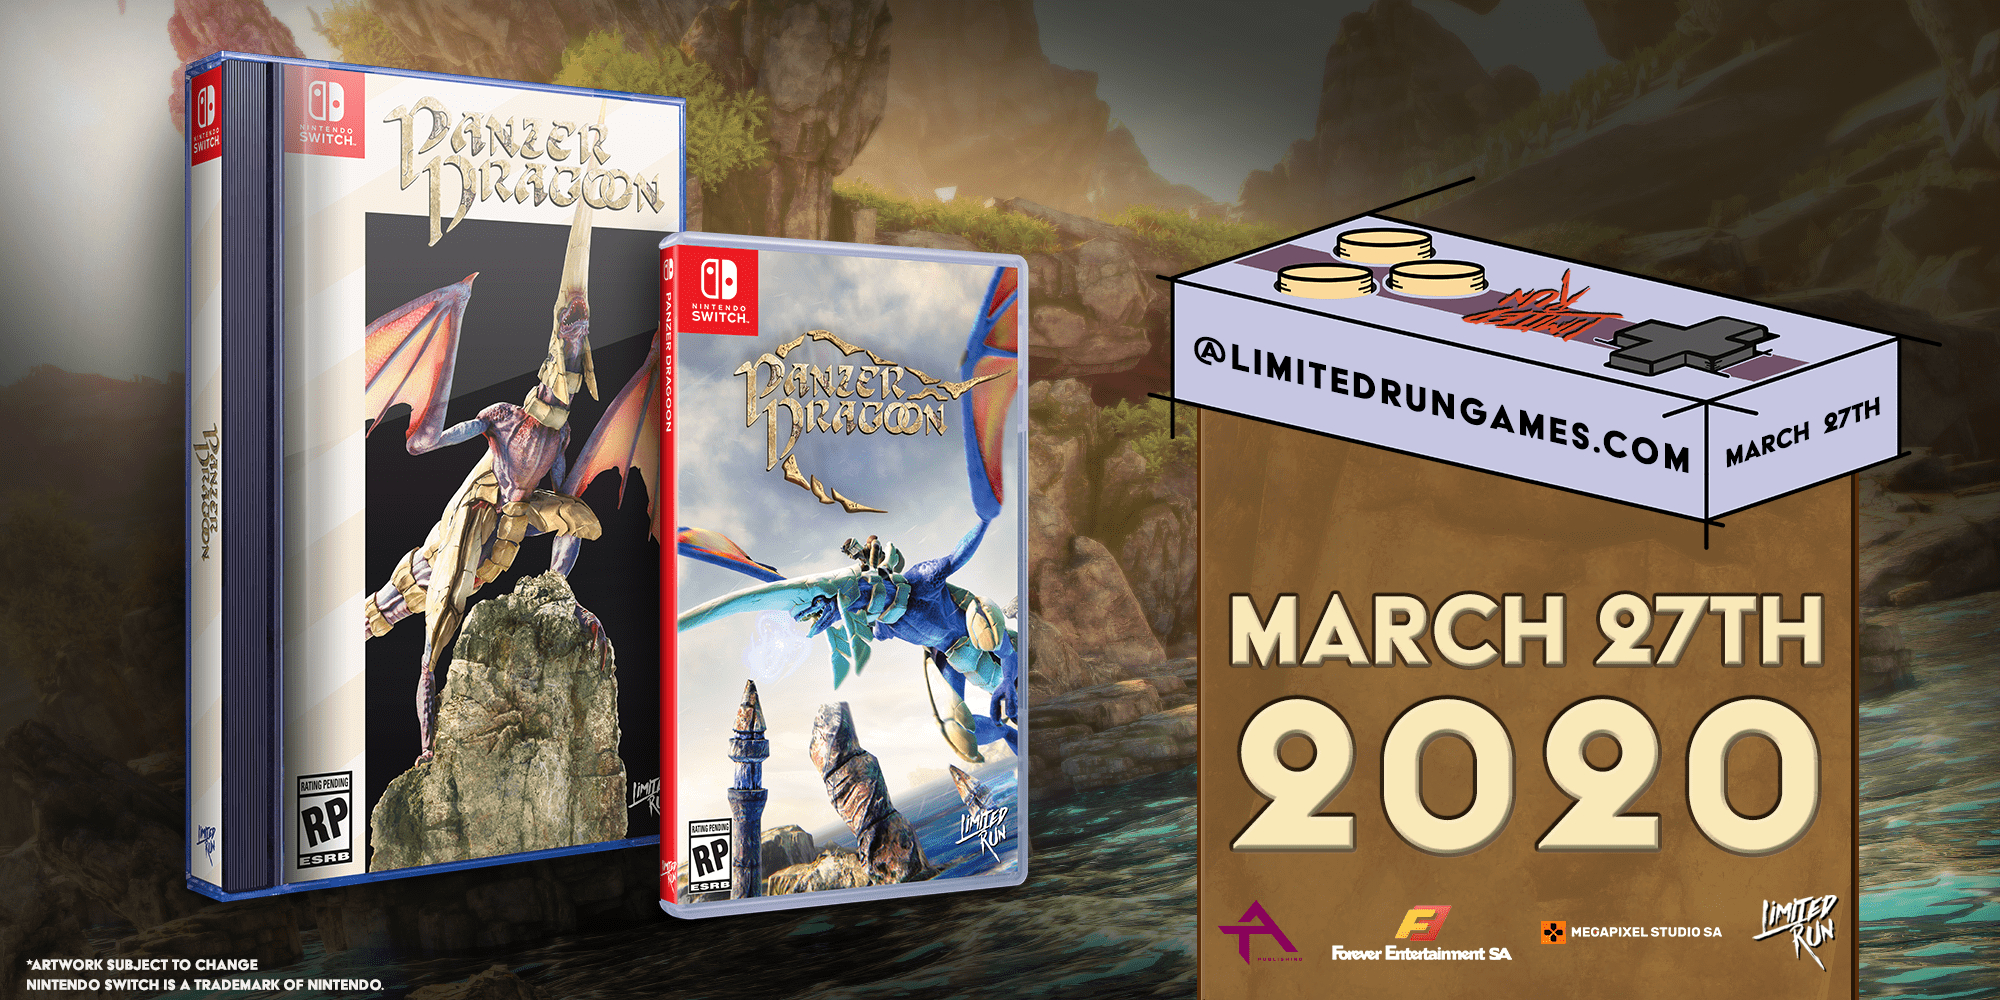 Panzer Dragoon: Remake Physical Editions Will Be Available to Pre-Order From Tomorrow